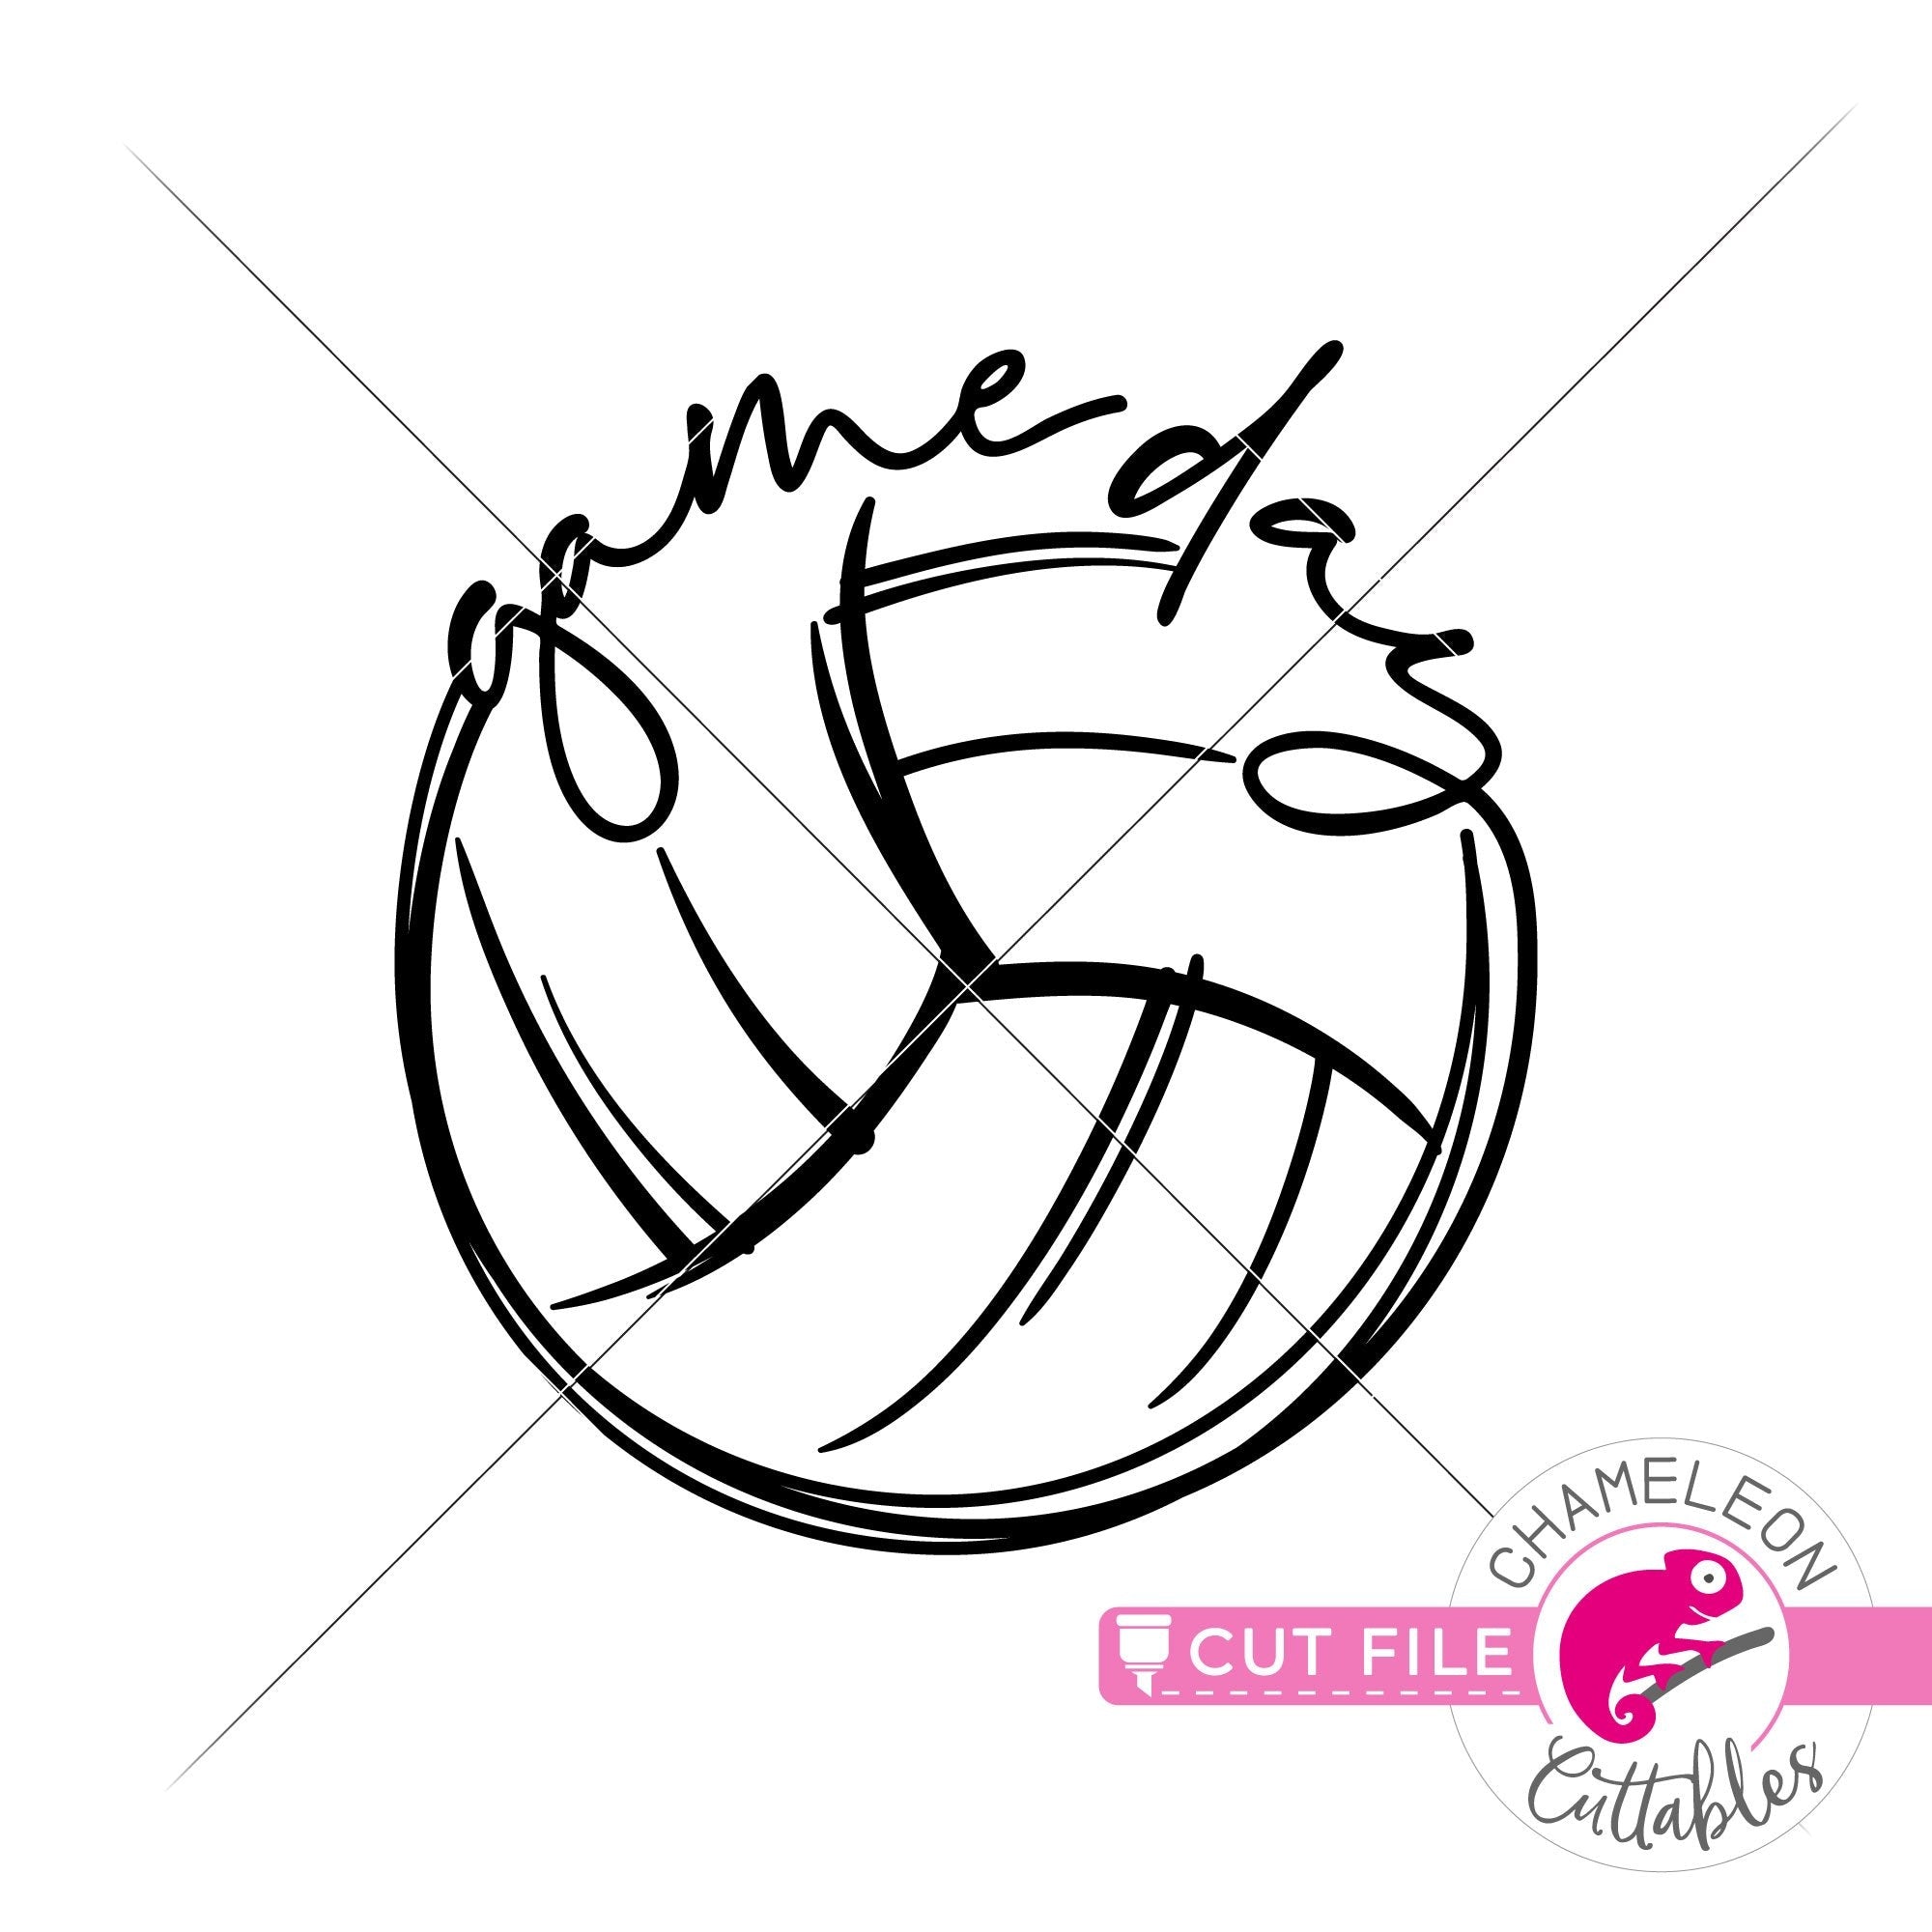 Download Game Day Volleyball Sketch Drawing Svg Png Dxf Eps Jpeg Chameleon Cuttables Llc Chameleon Cuttables Llc